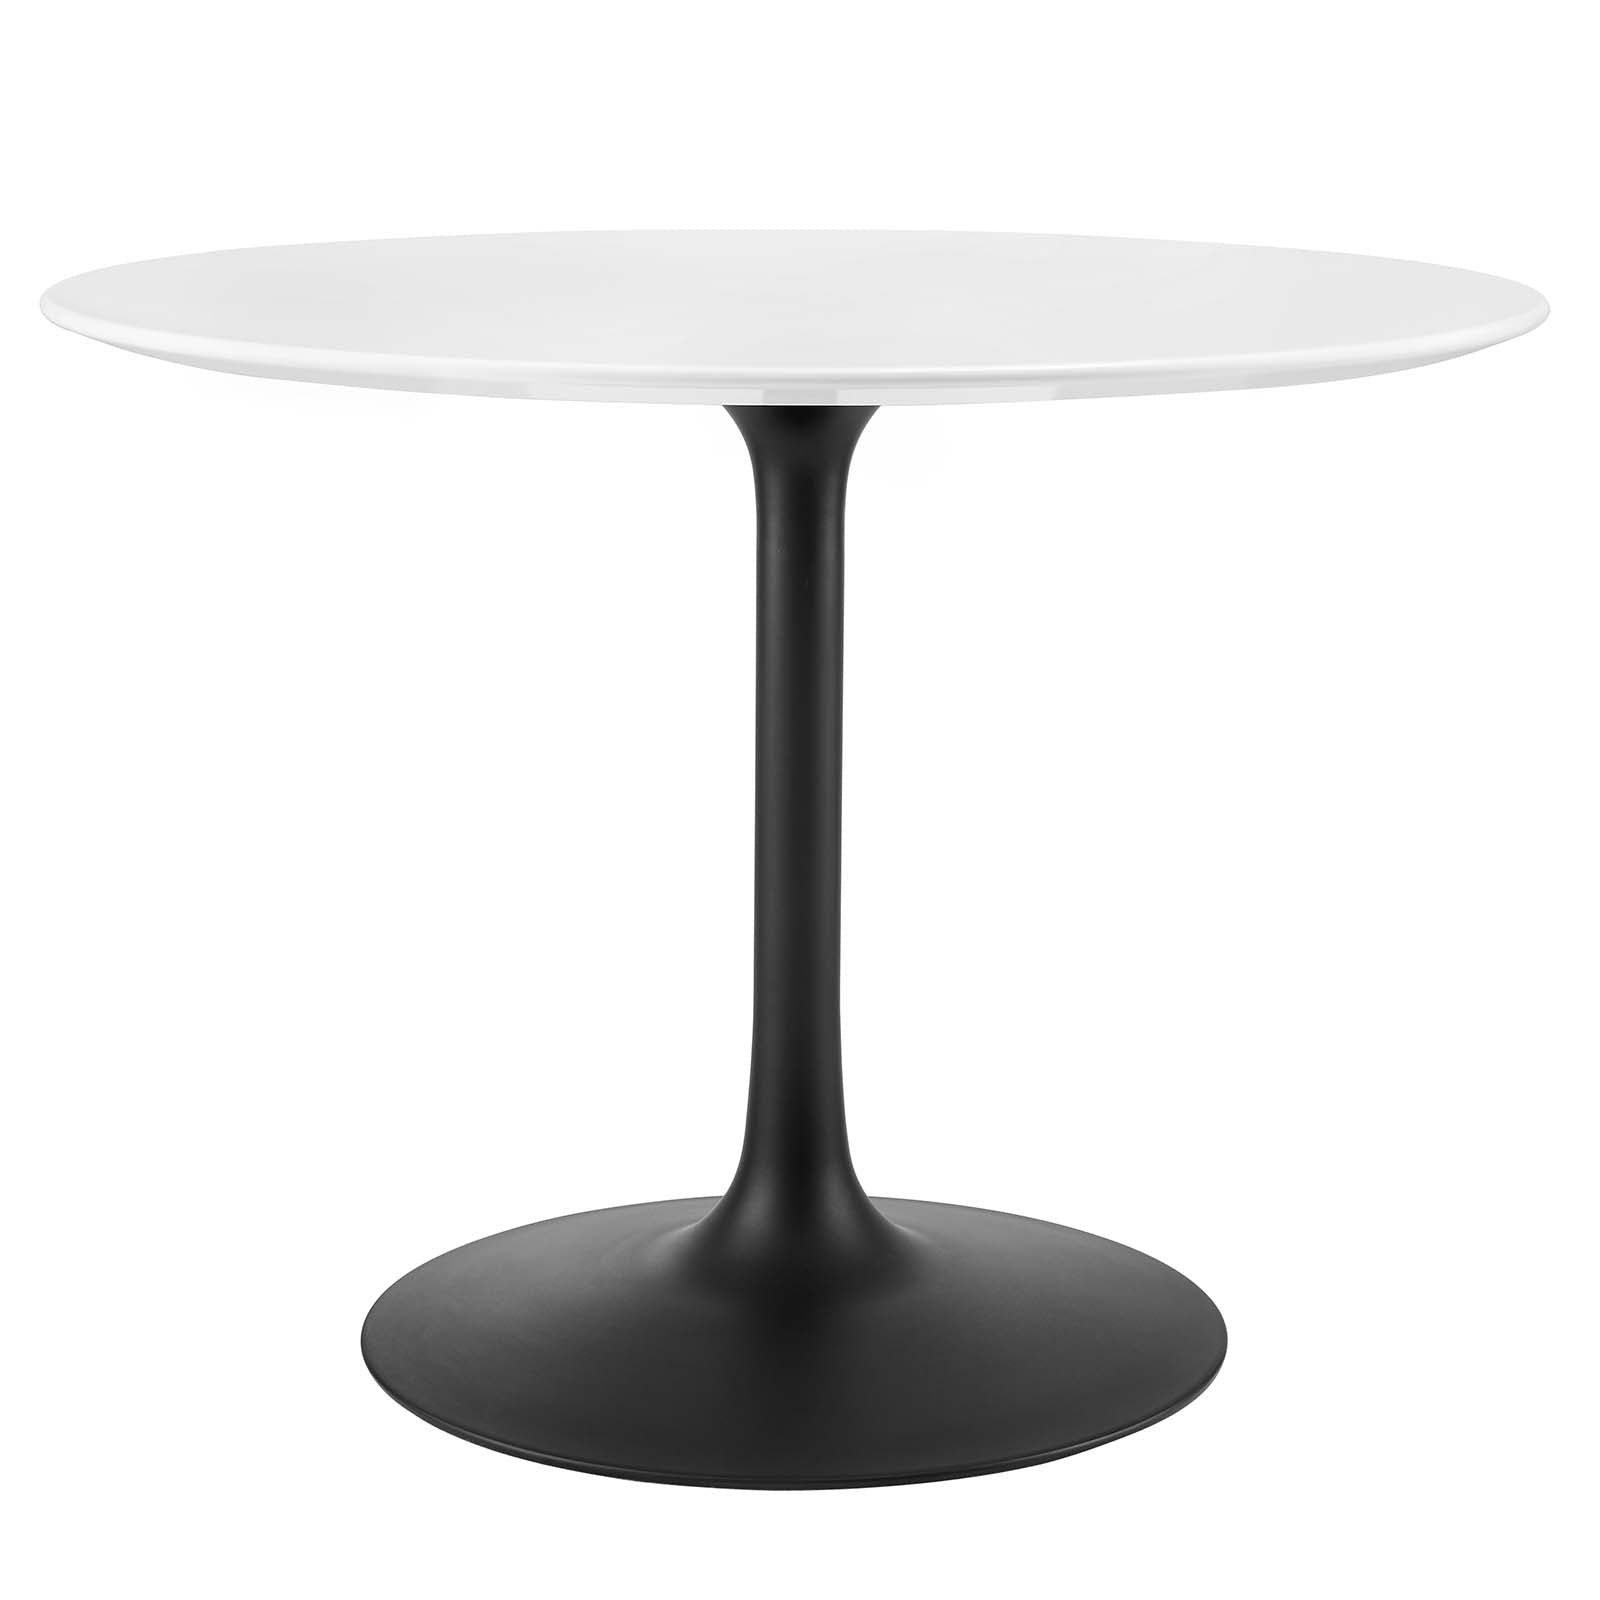 Lippa 40" Round Wood Dining Table - East Shore Modern Home Furnishings